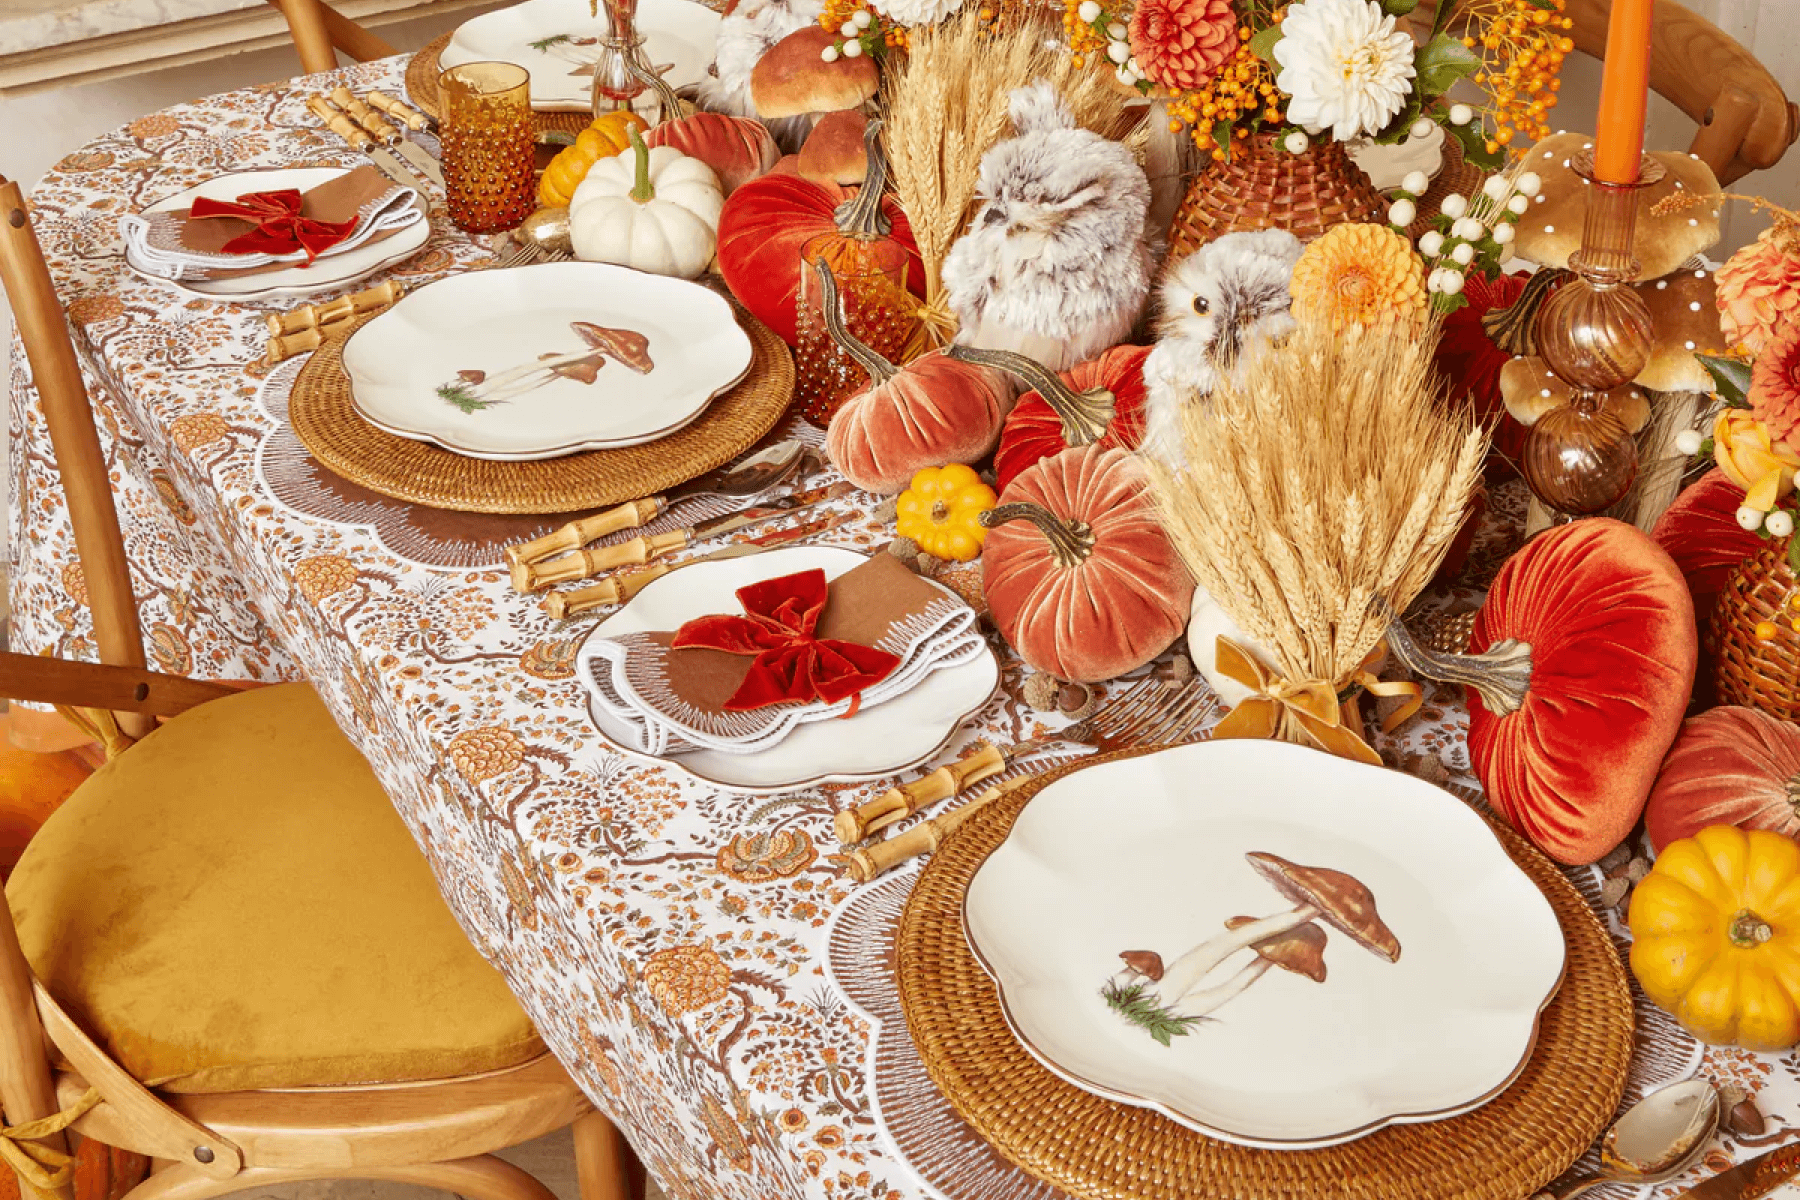 30 Fall decor ideas for your next autumnal party